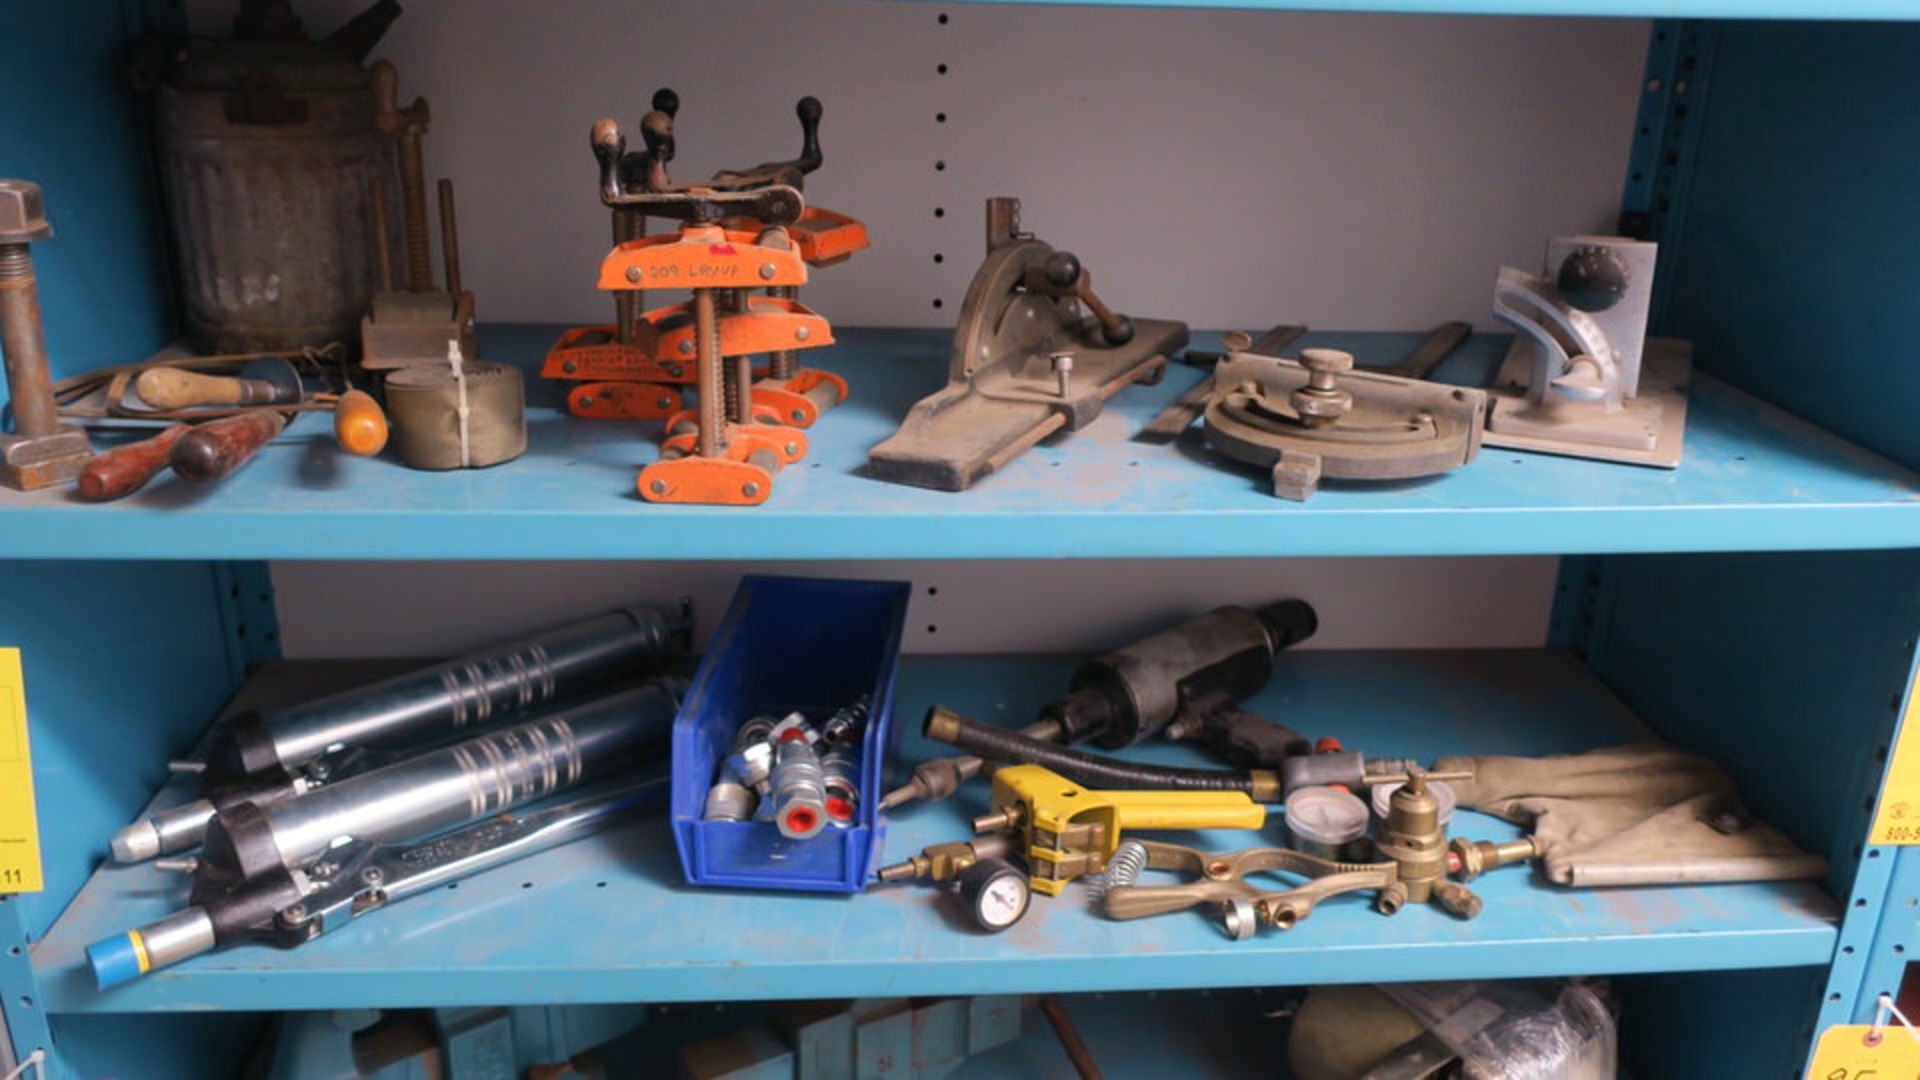 Wood working strap clamps, guides, hand tools, grease guns and misc items